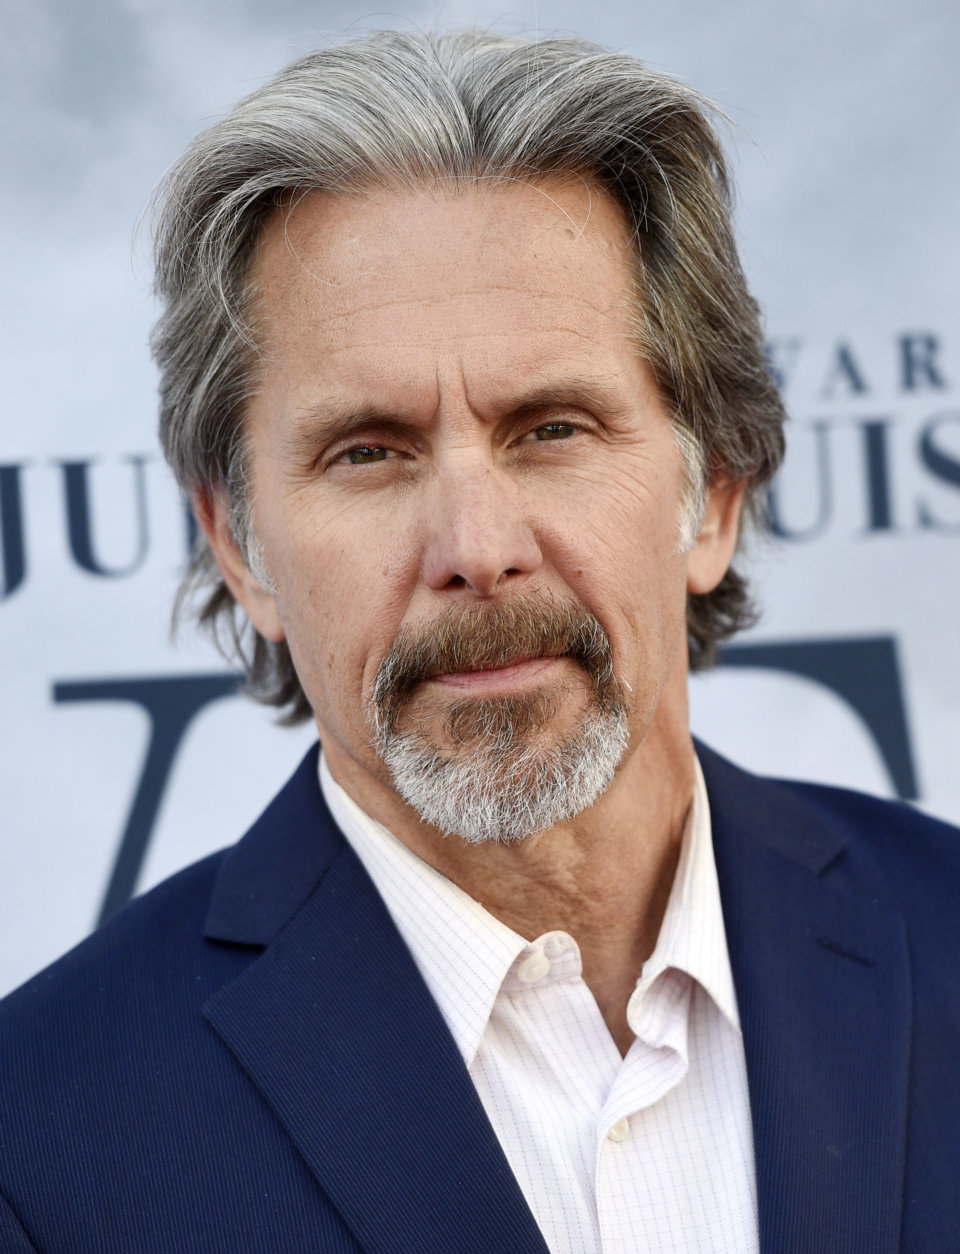 Gary Cole, a cast member in the HBO series "Veep," poses at an Emmy For Your Consideration event for the show at the Television Academy, on Thursday, May 25, 2017, in Los Angeles. (Photo by Chris Pizzello/Invision/AP)